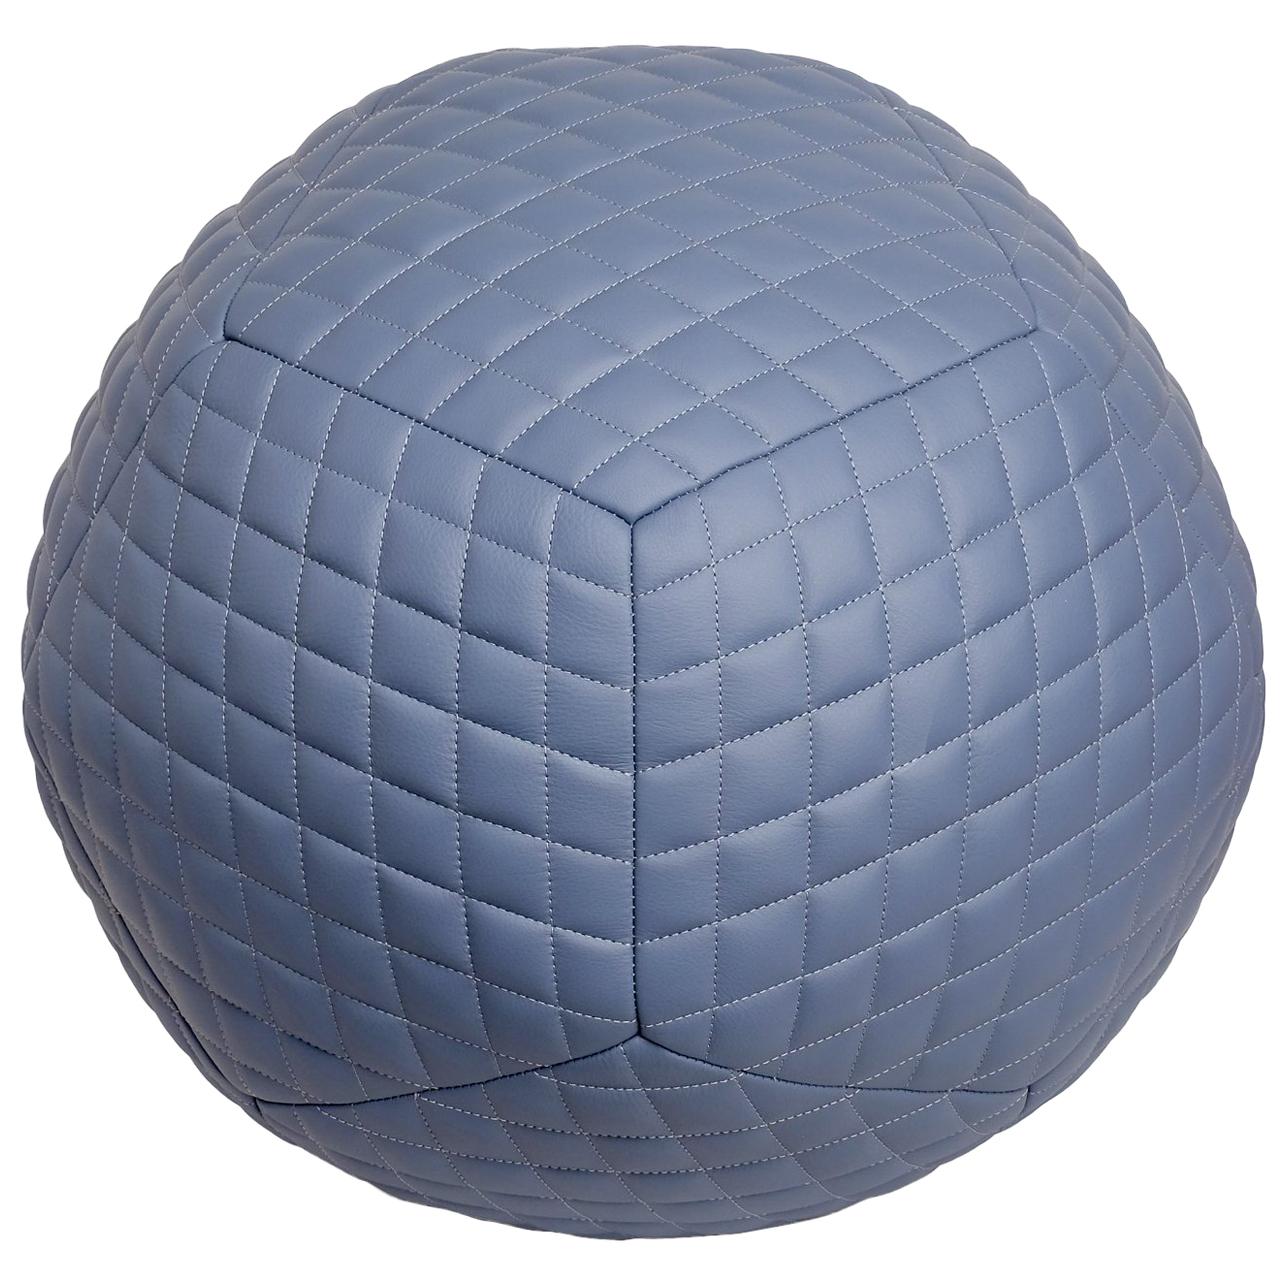 Diamond Ottoman 22"Ø in Slate Blue Leather by Moses Nadel